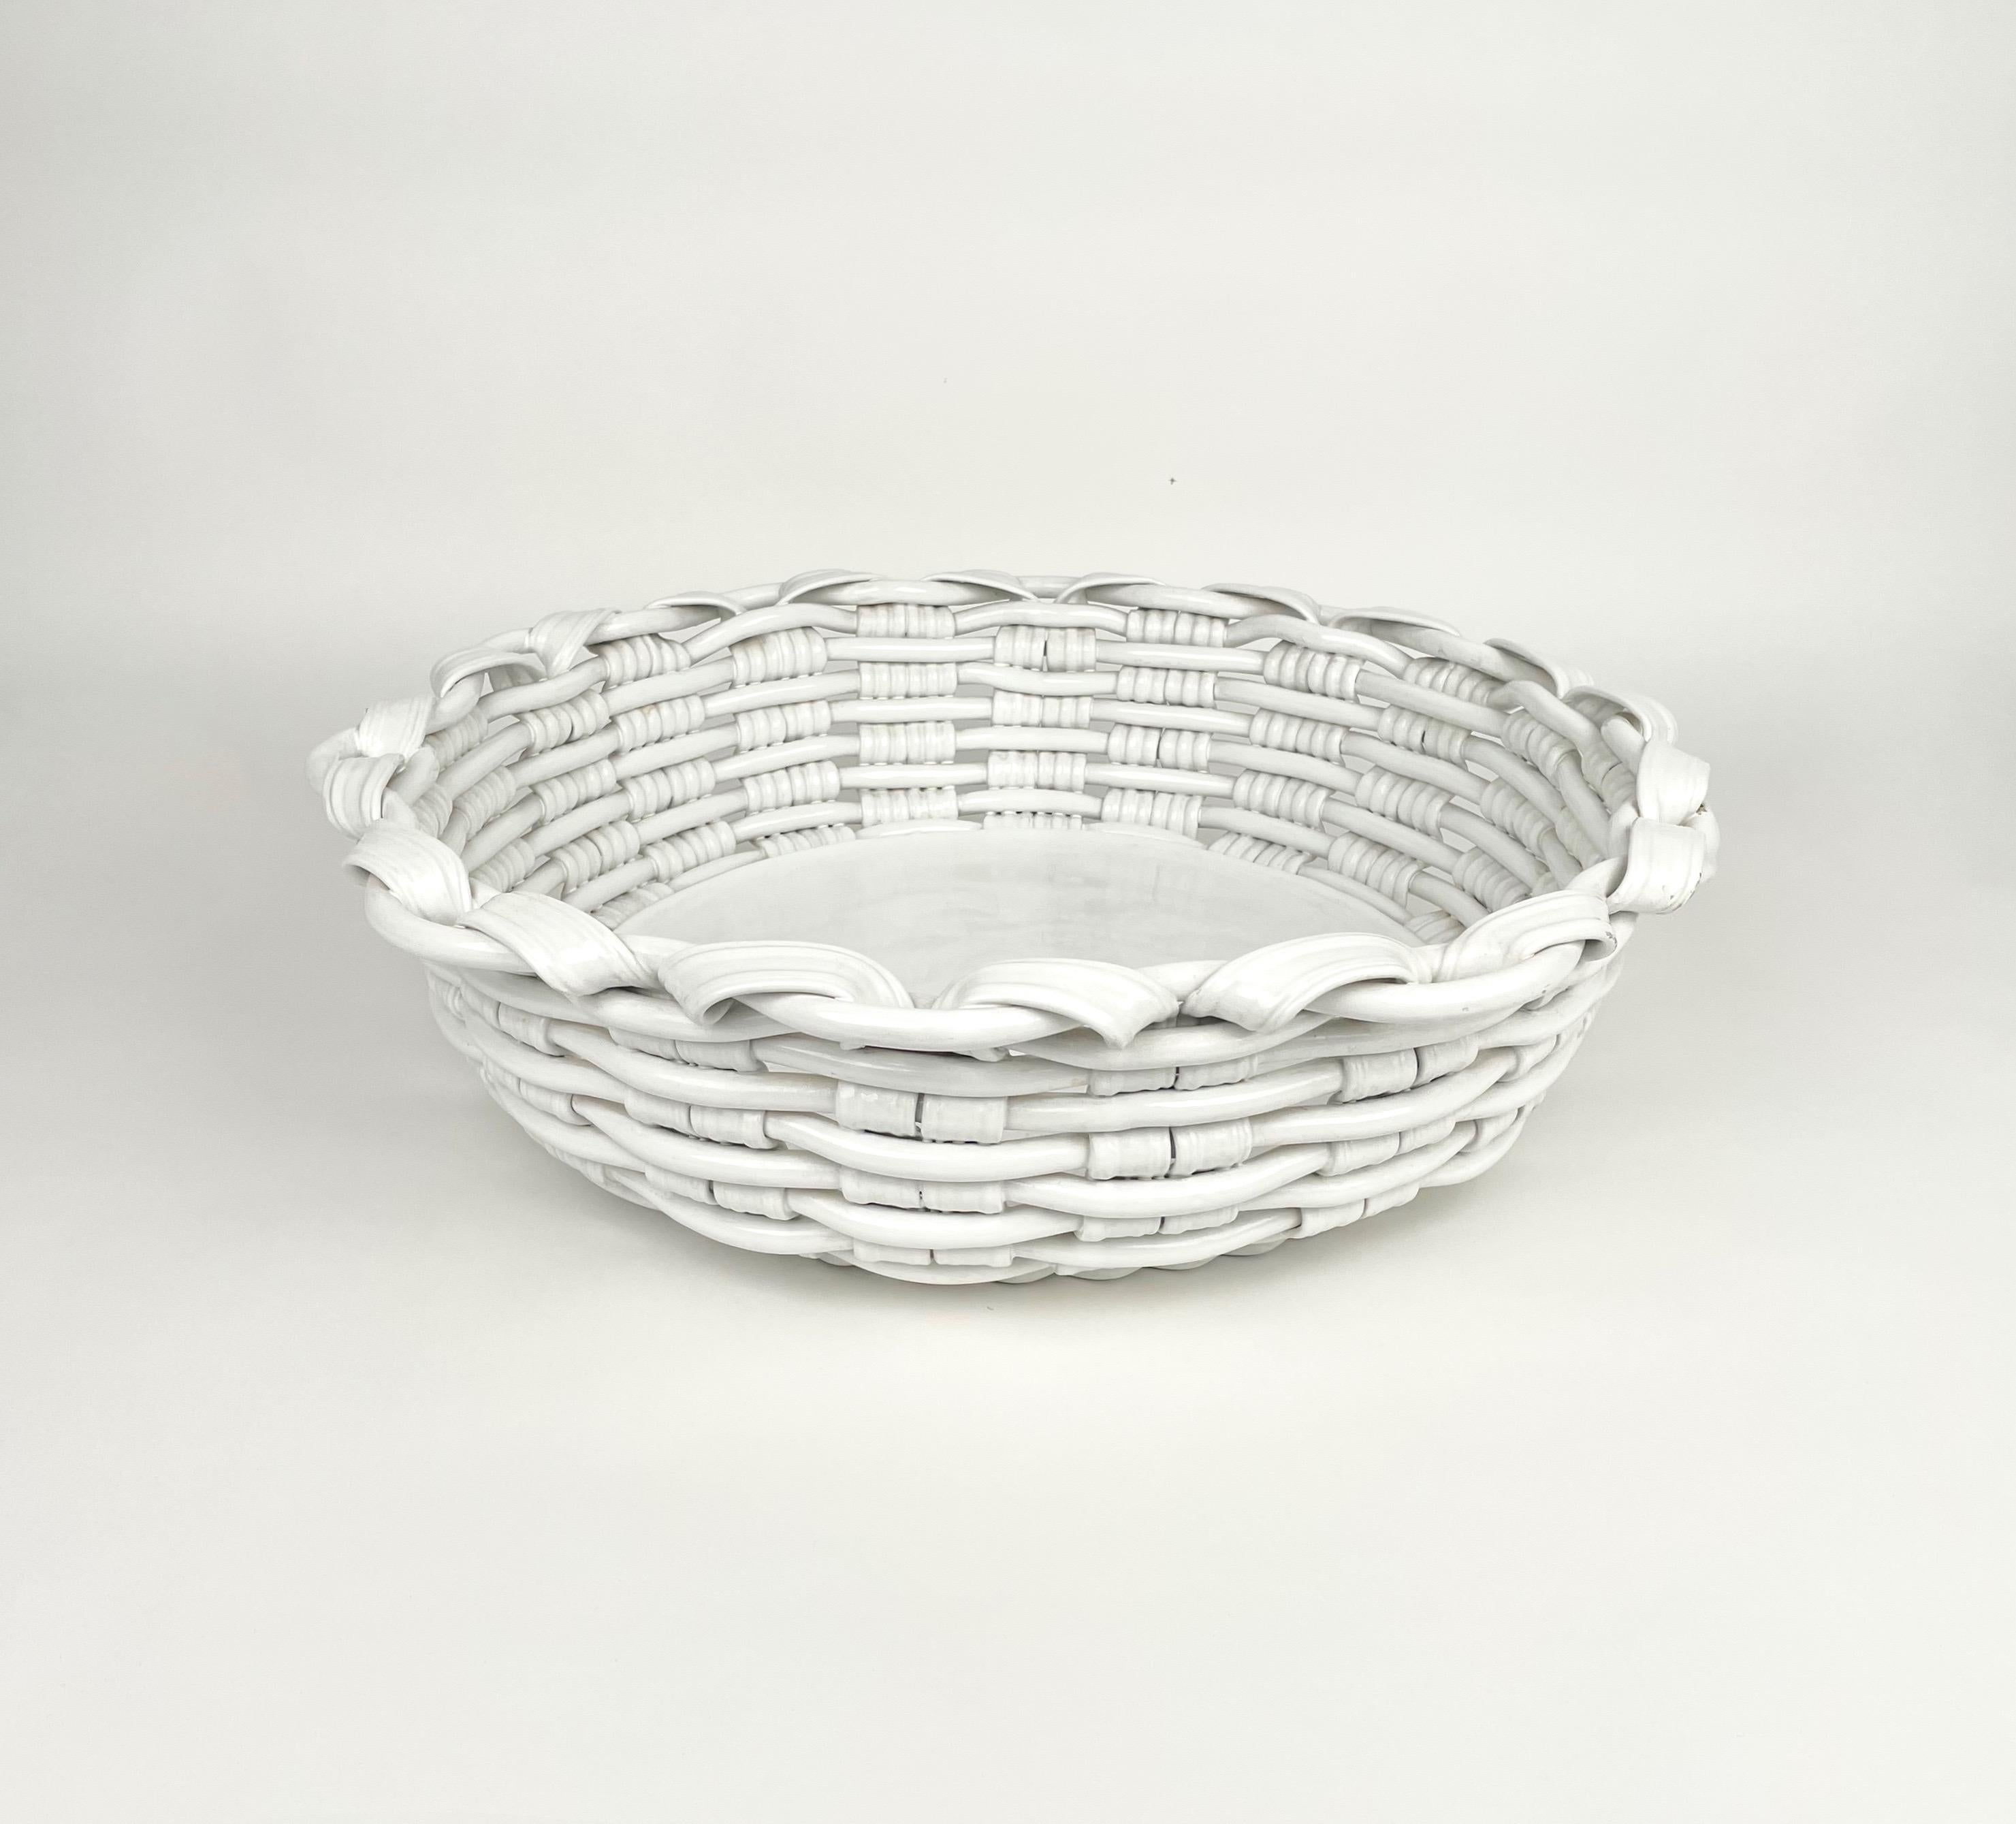 Big centerpiece bowl in woven white ceramic manufactured by Vivai del Sud, Italy, 1970s. 
The original label is still attached on the bottom, as shown in the photos.

Vivai del Sud was a Roman company established in 1950 as a specialist in